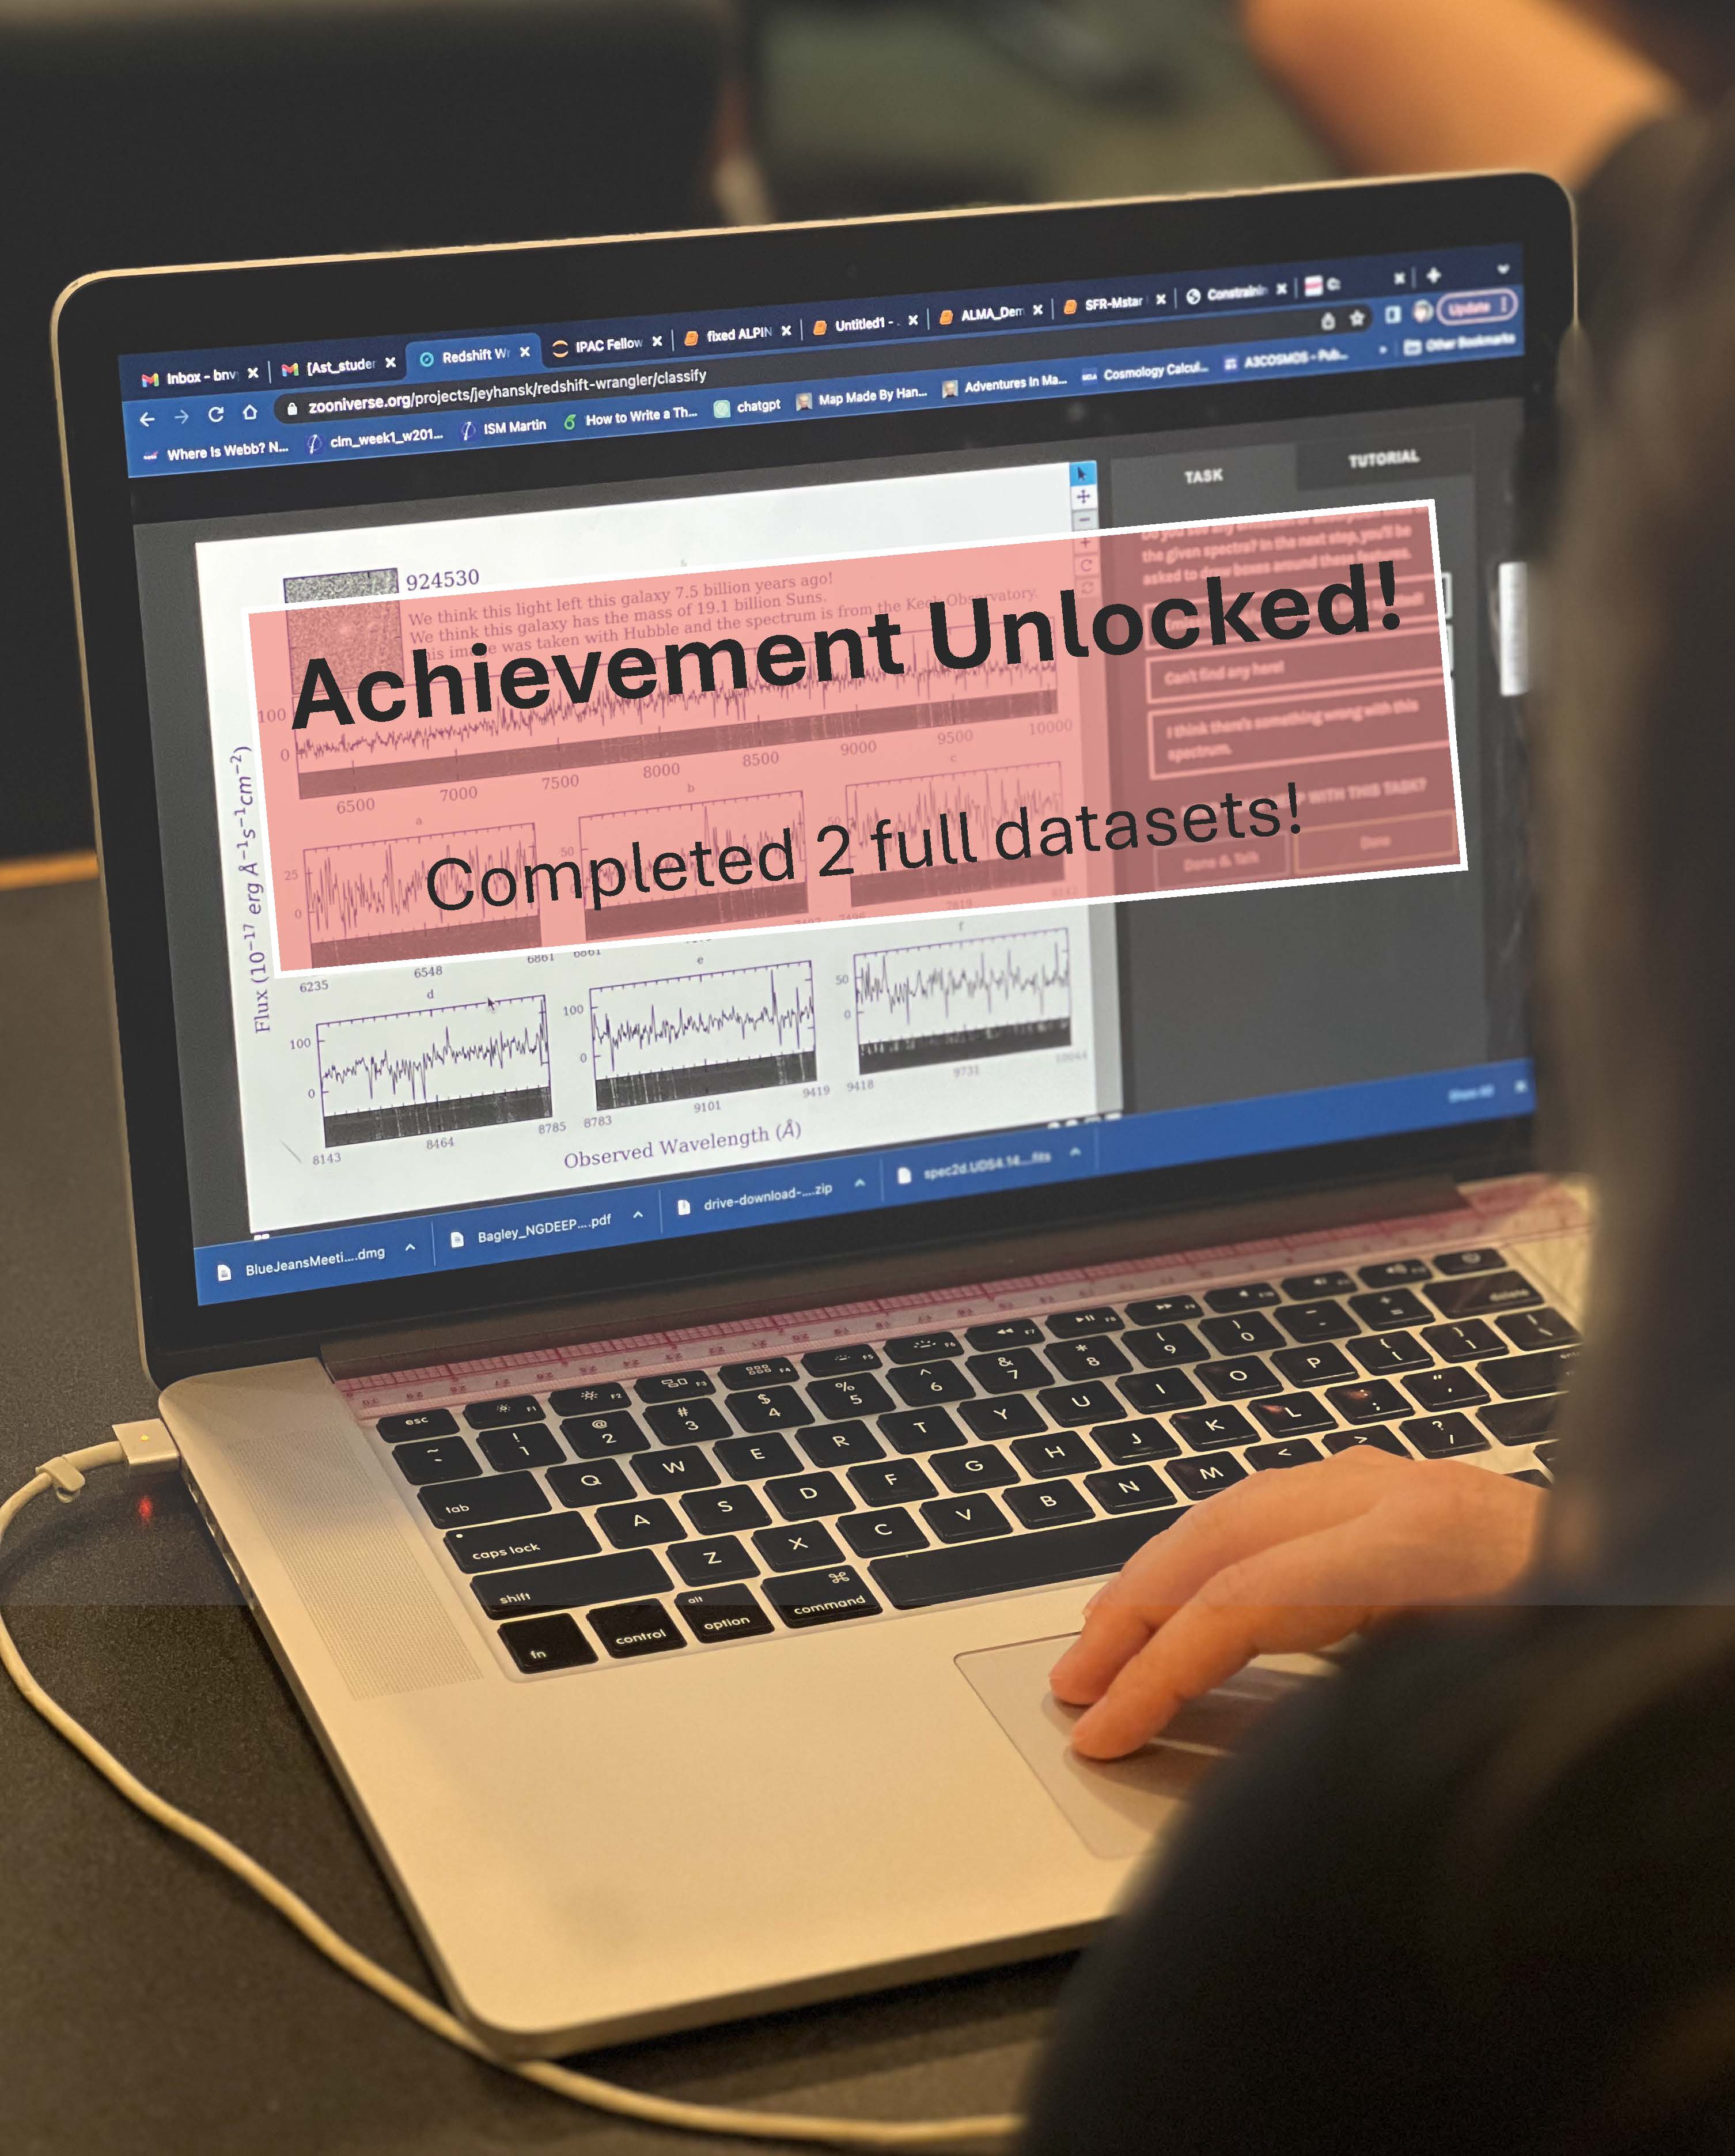 **Alt Text:** A person is working on a laptop with a screen displaying graphs and text. The screen has a large overlay with the text "Achievement Unlocked! Completed 2 full datasets!" The person's right hand is visible on the trackpad, and various browser tabs are open at the top of the screen, indicating an active and busy research session. The environment suggests a focus on data analysis and scientific work.